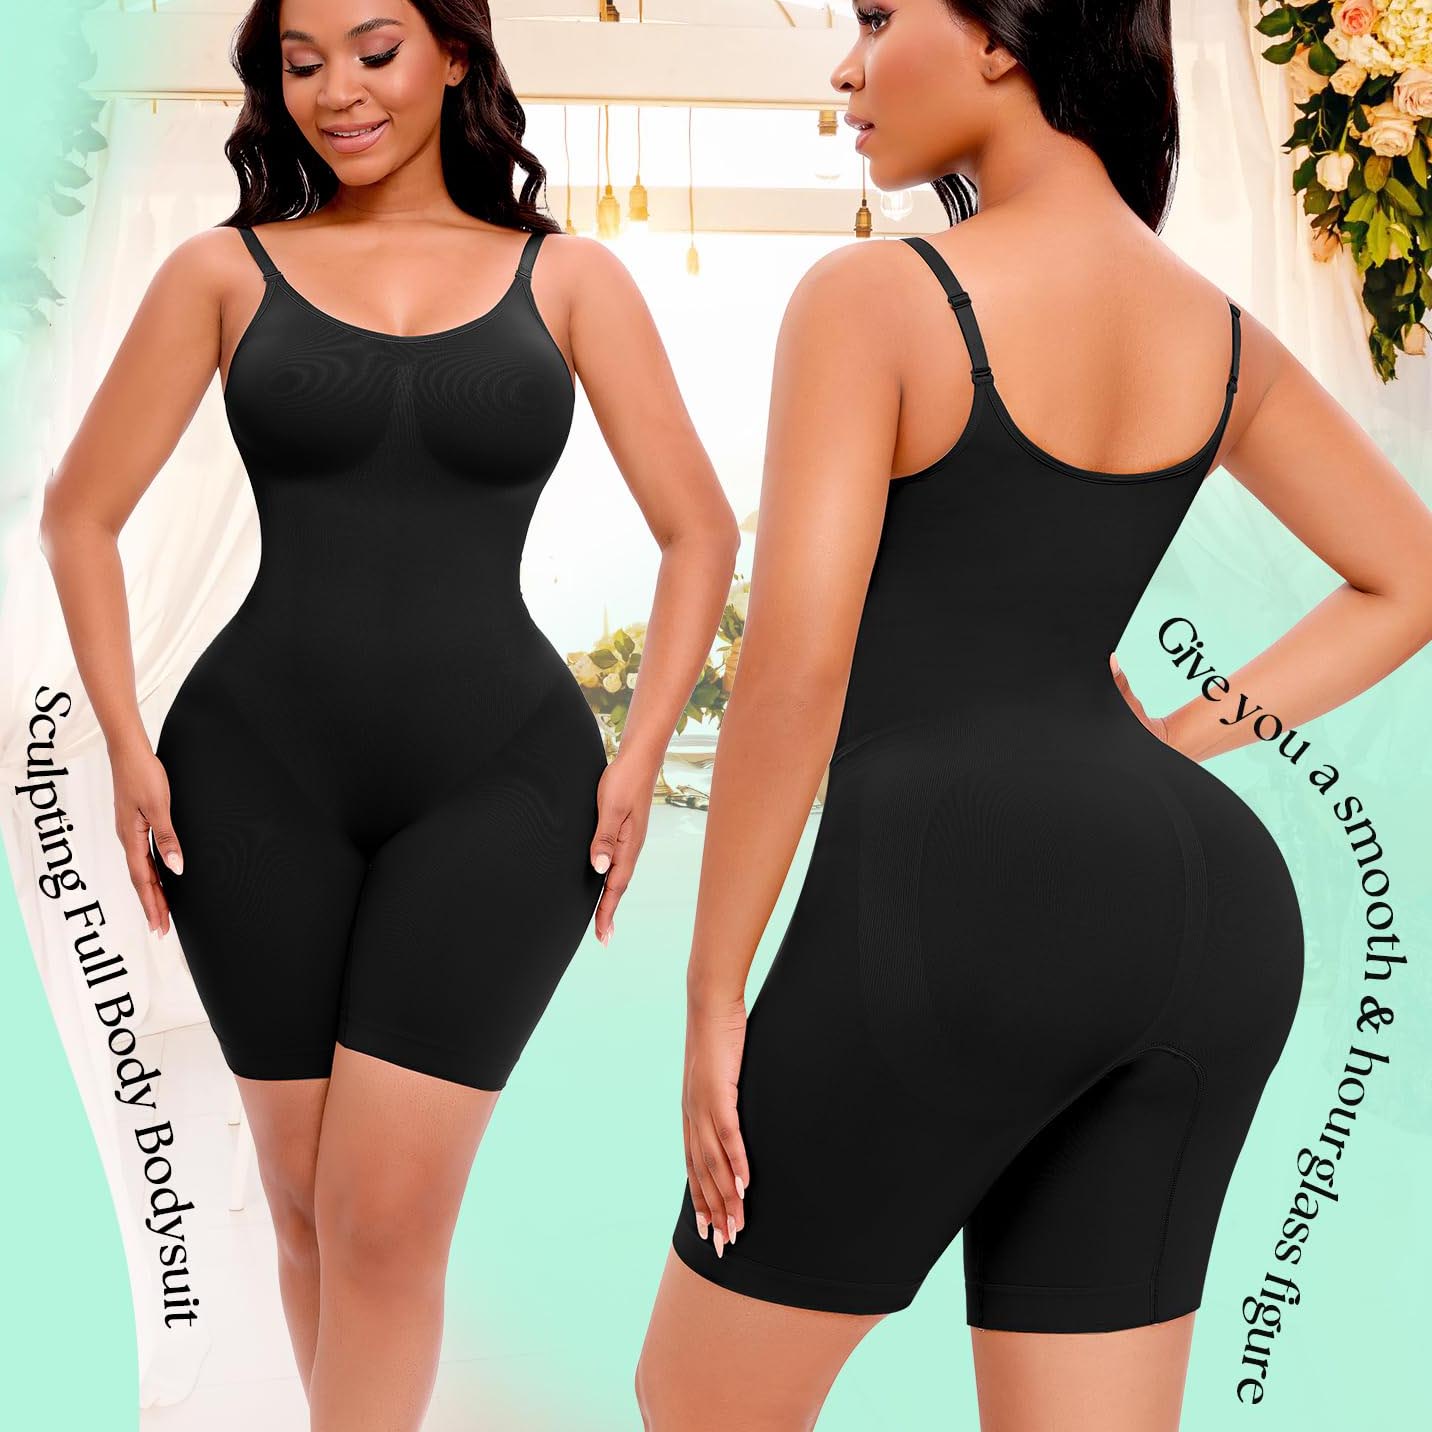 Curveshe, 💃Charming Curves After faja! Get Charming Curves by CurveShe!💝  😍😍40% Off For The 2nd One